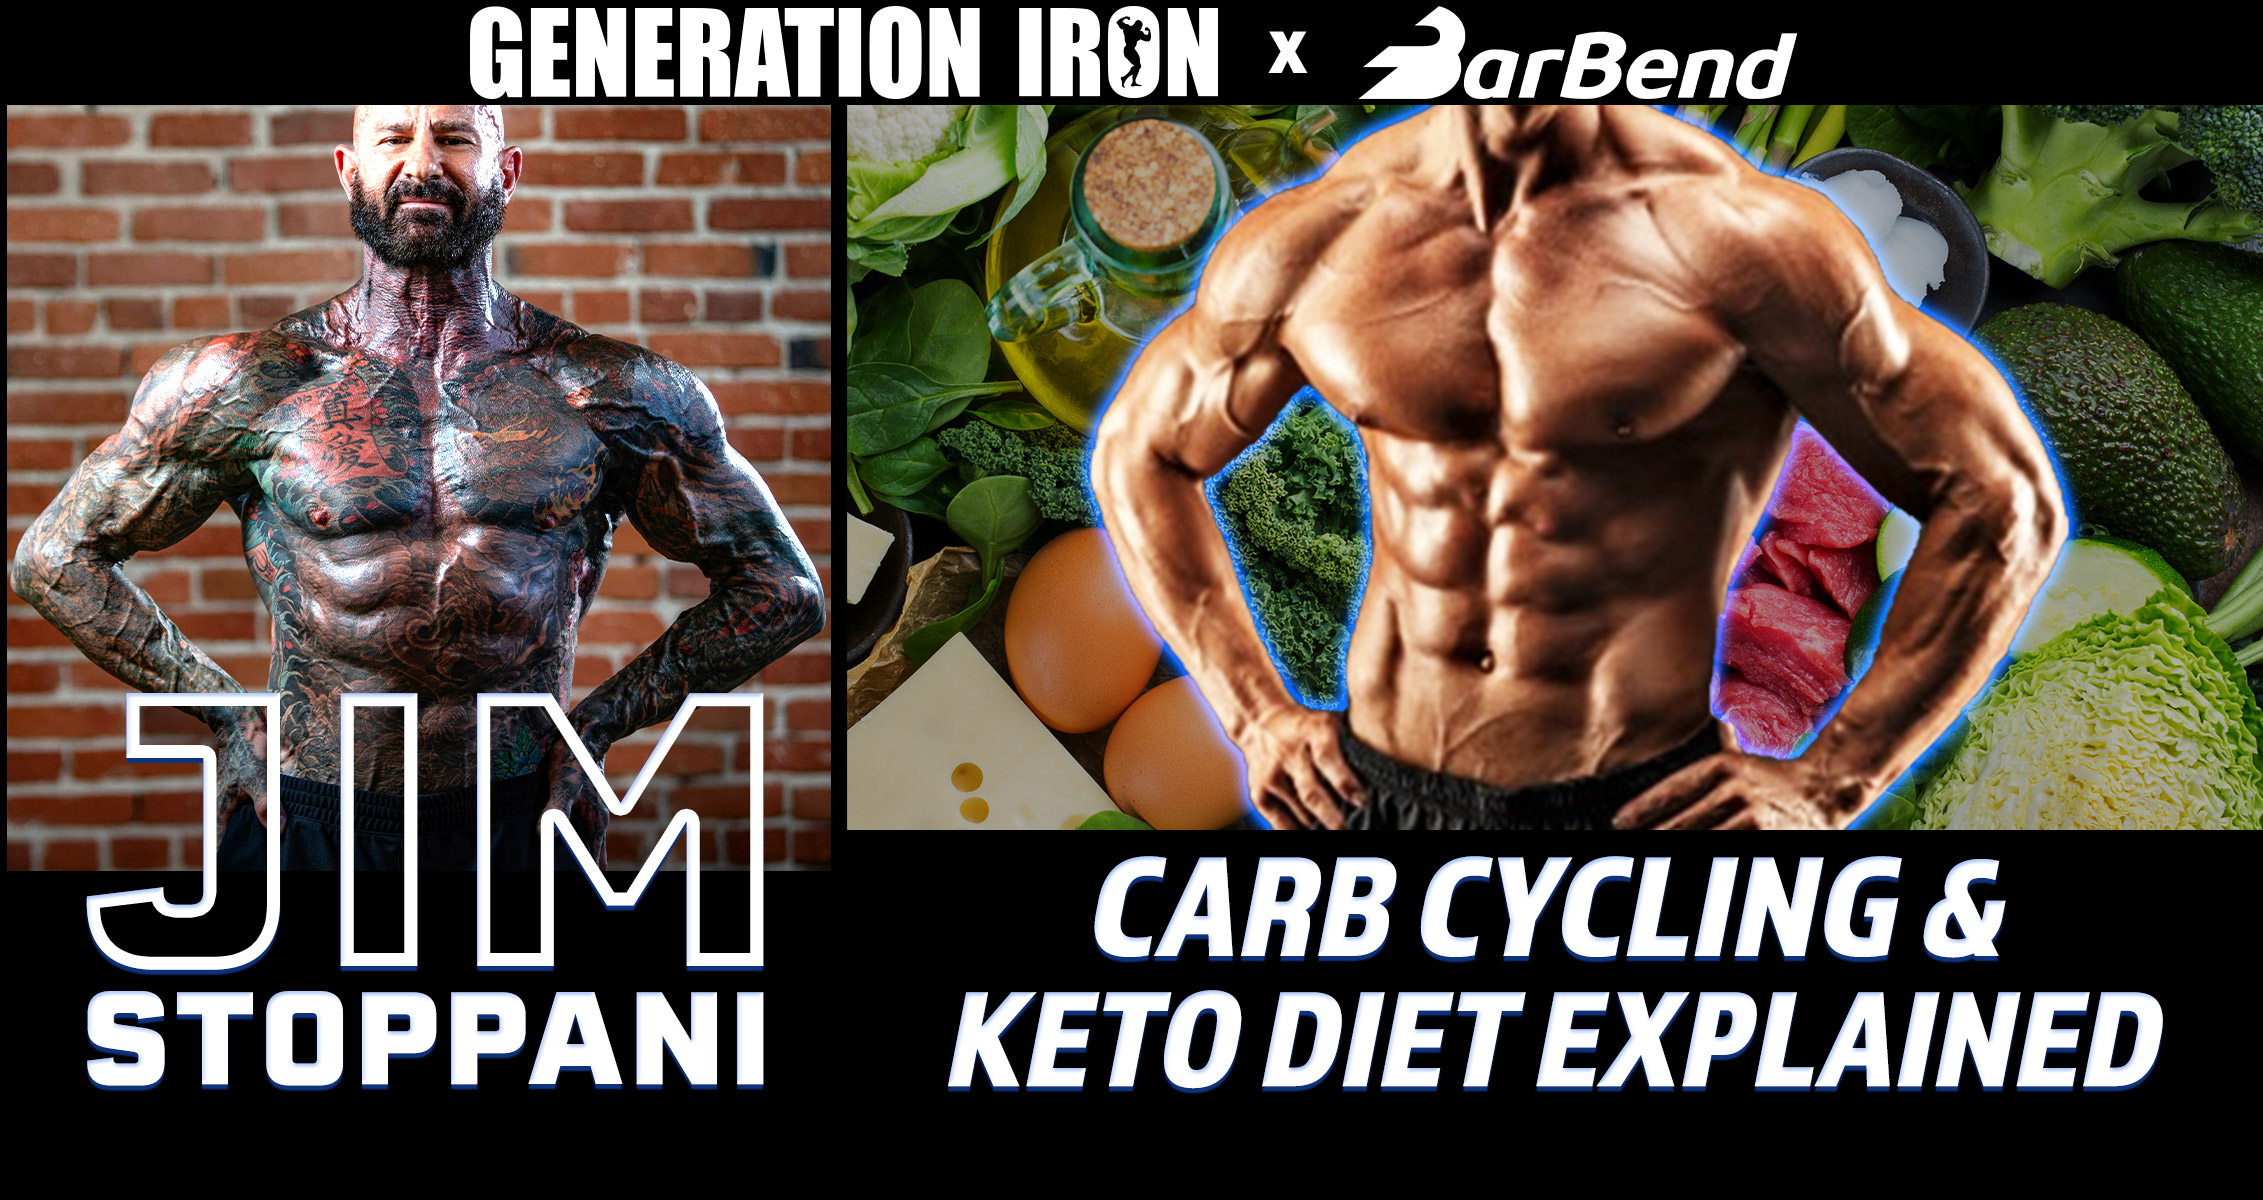 Jim Stoppani: Keto Diet Vs Carb Cycling, Which Is Best?